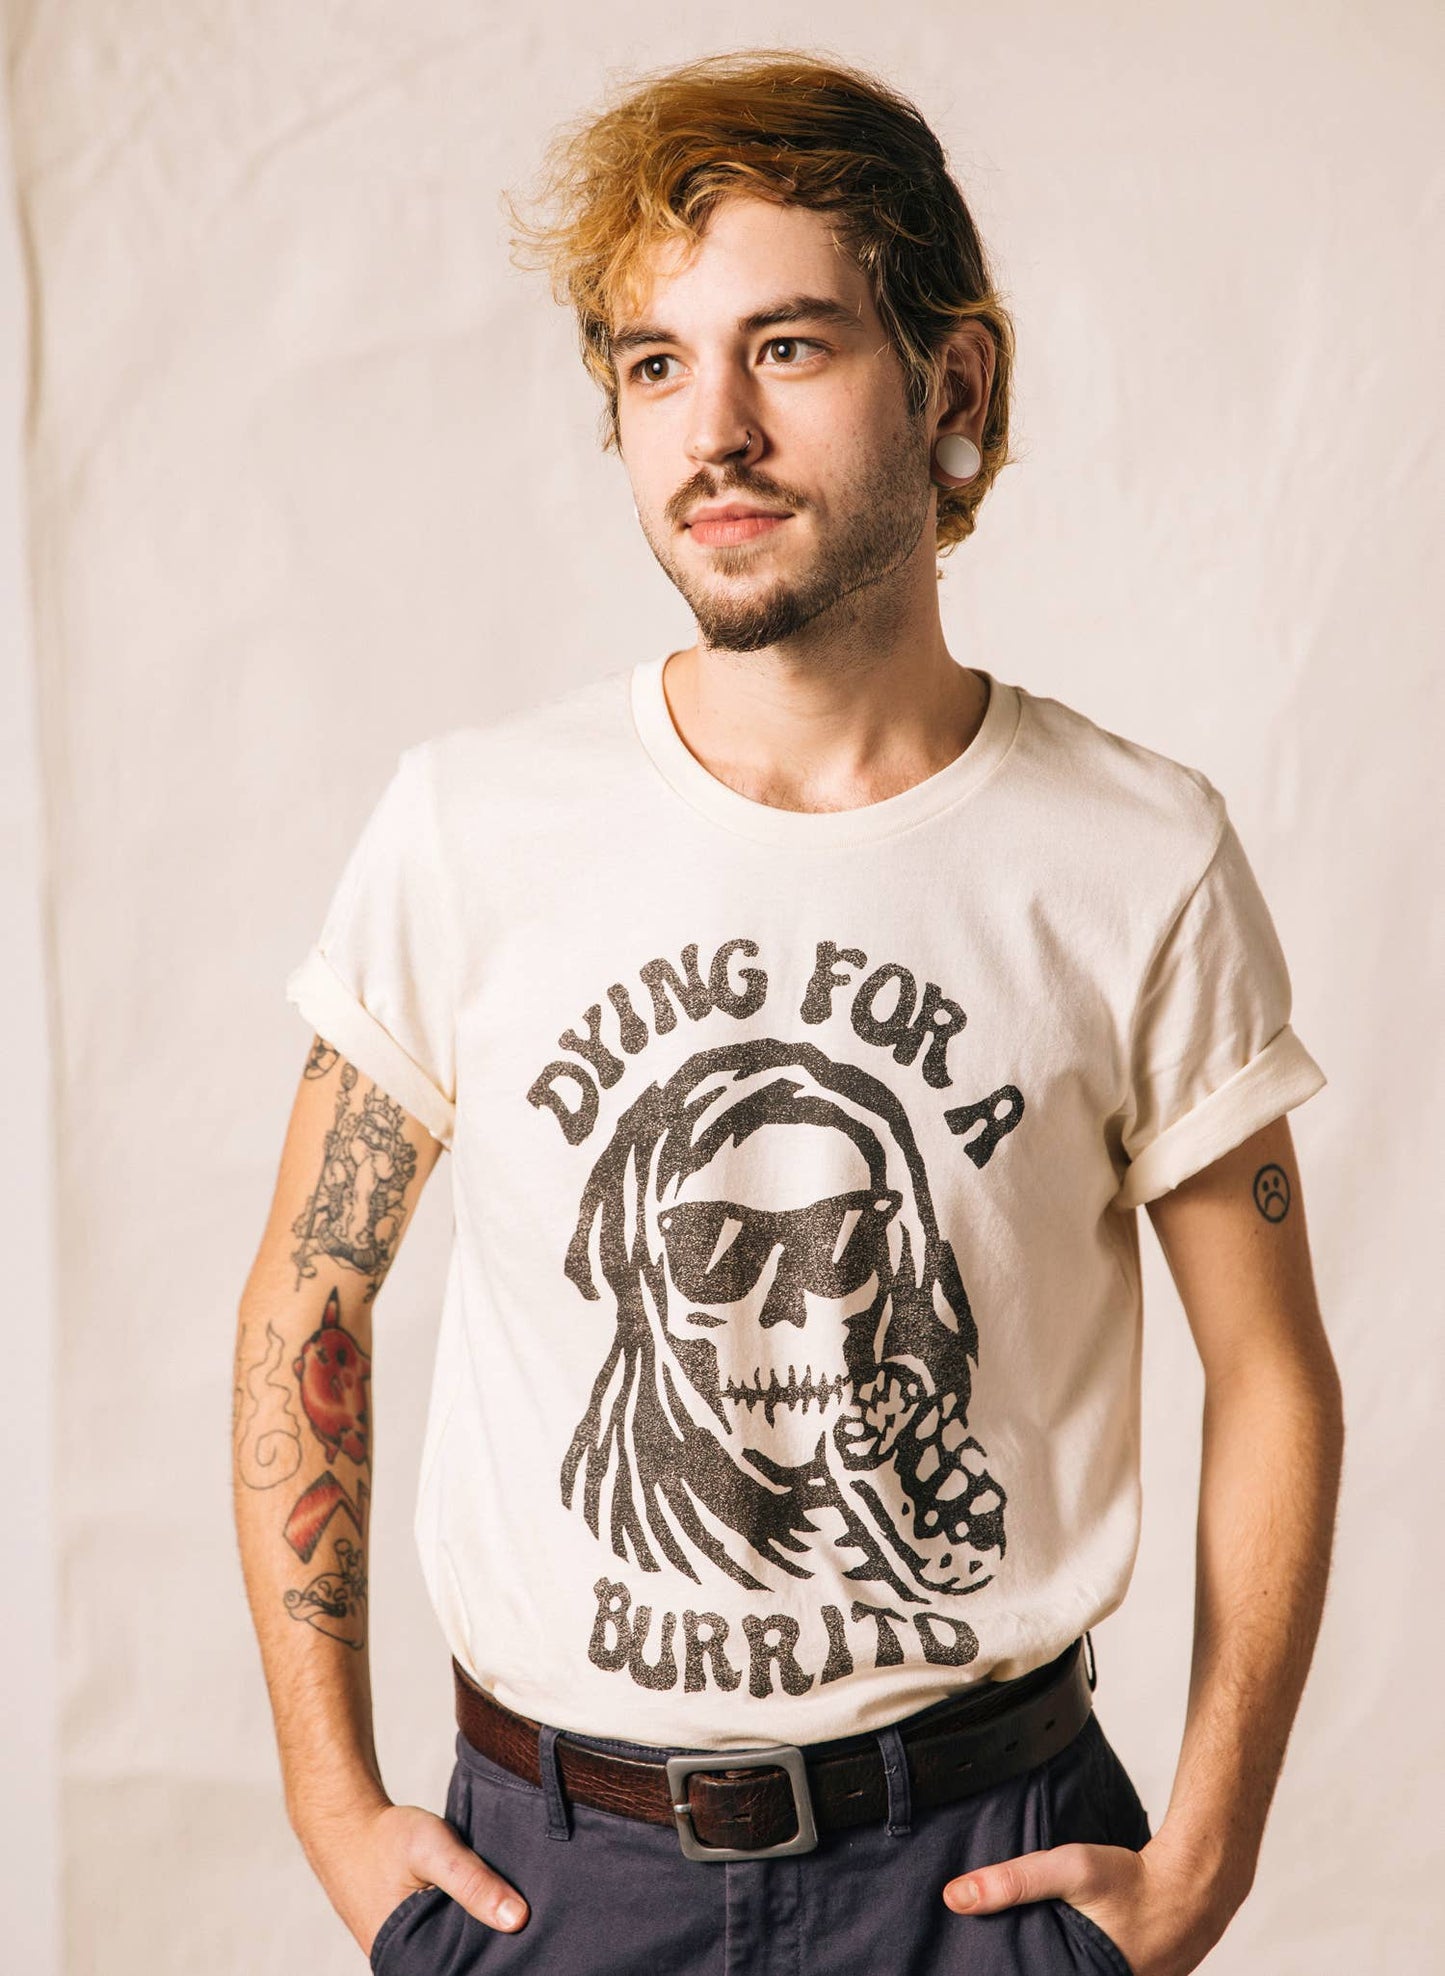 Dying for a Burrito Tee